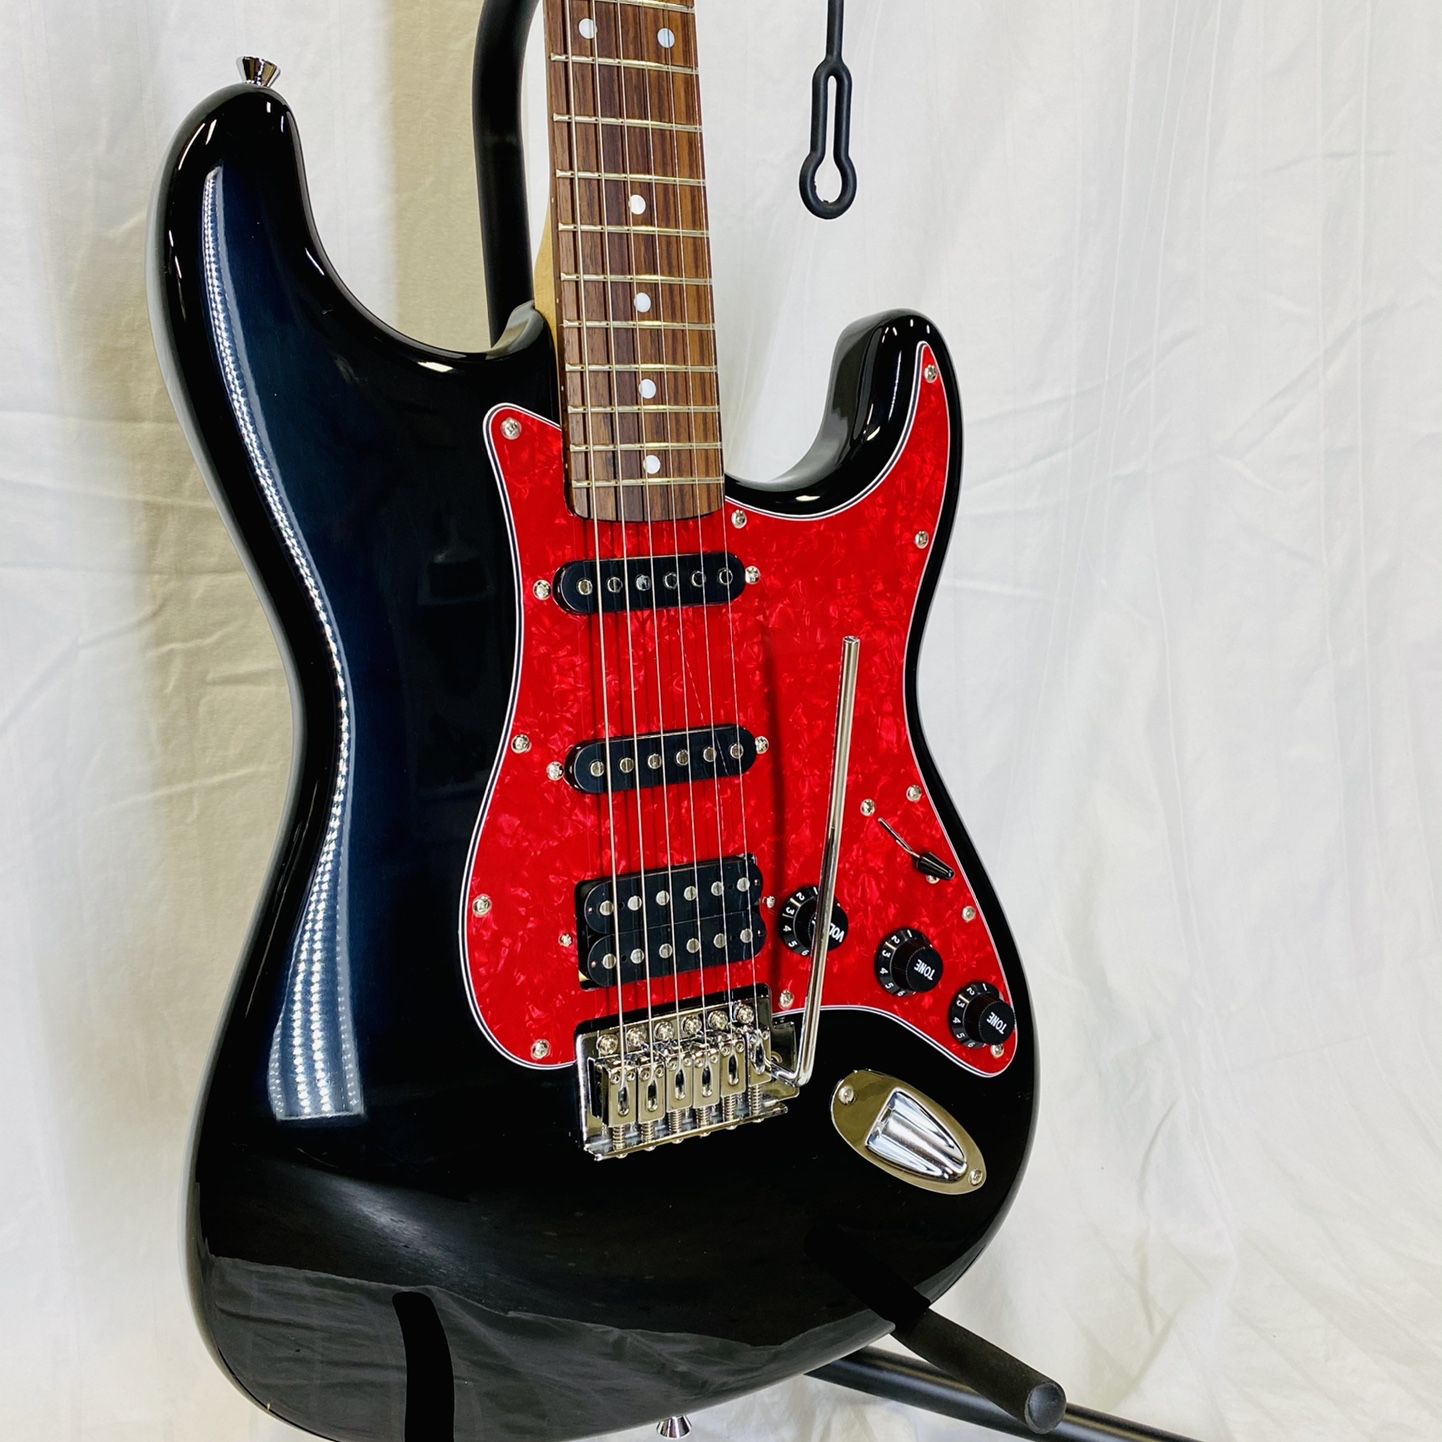 Squire (By Fender) Stratocaster, Upgraded/Modded